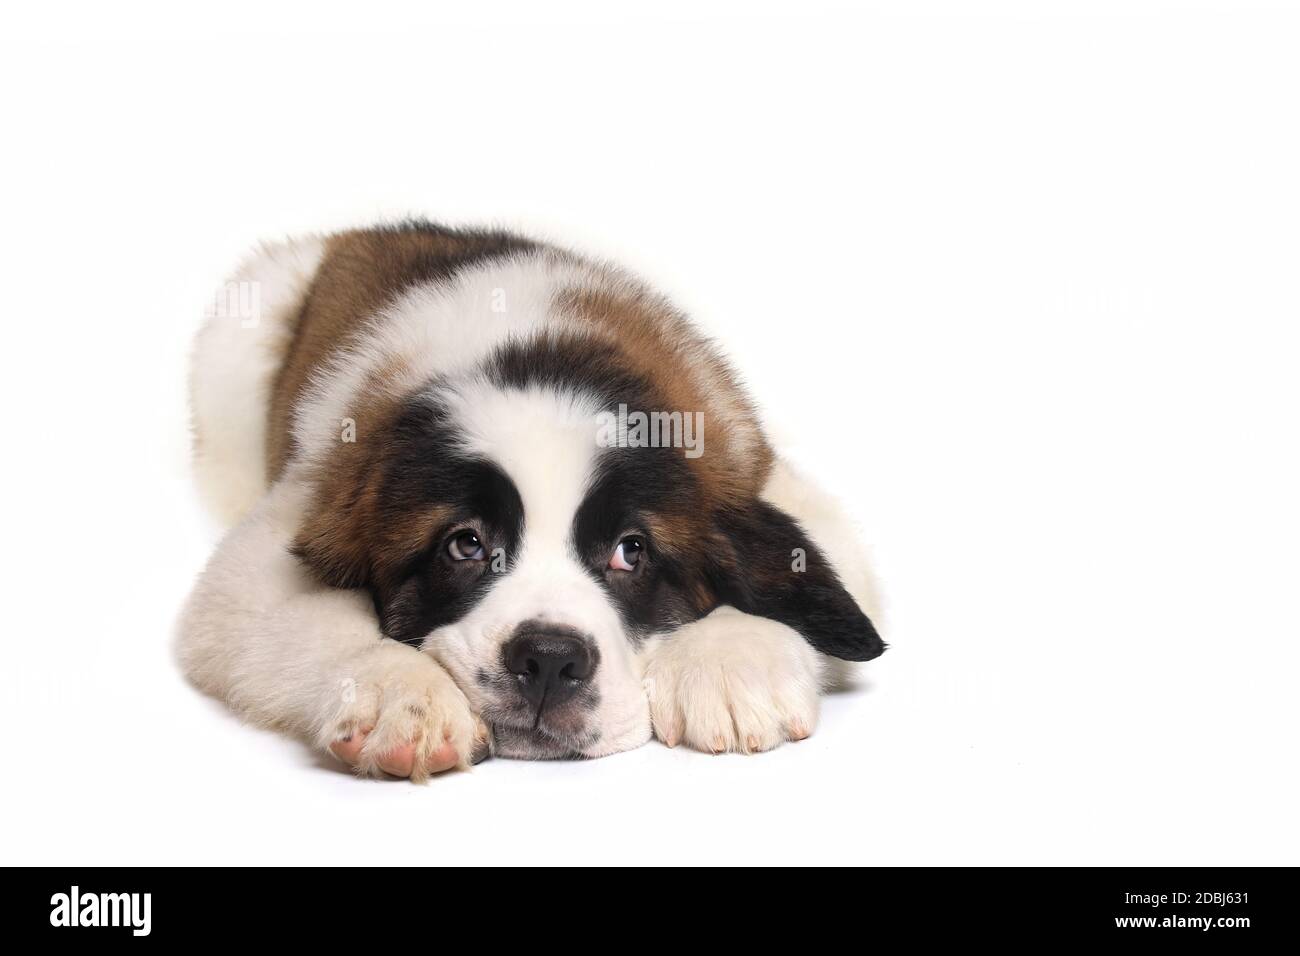 Adorable Saint Bernard Puppy With Sweet Expression Stock Photo